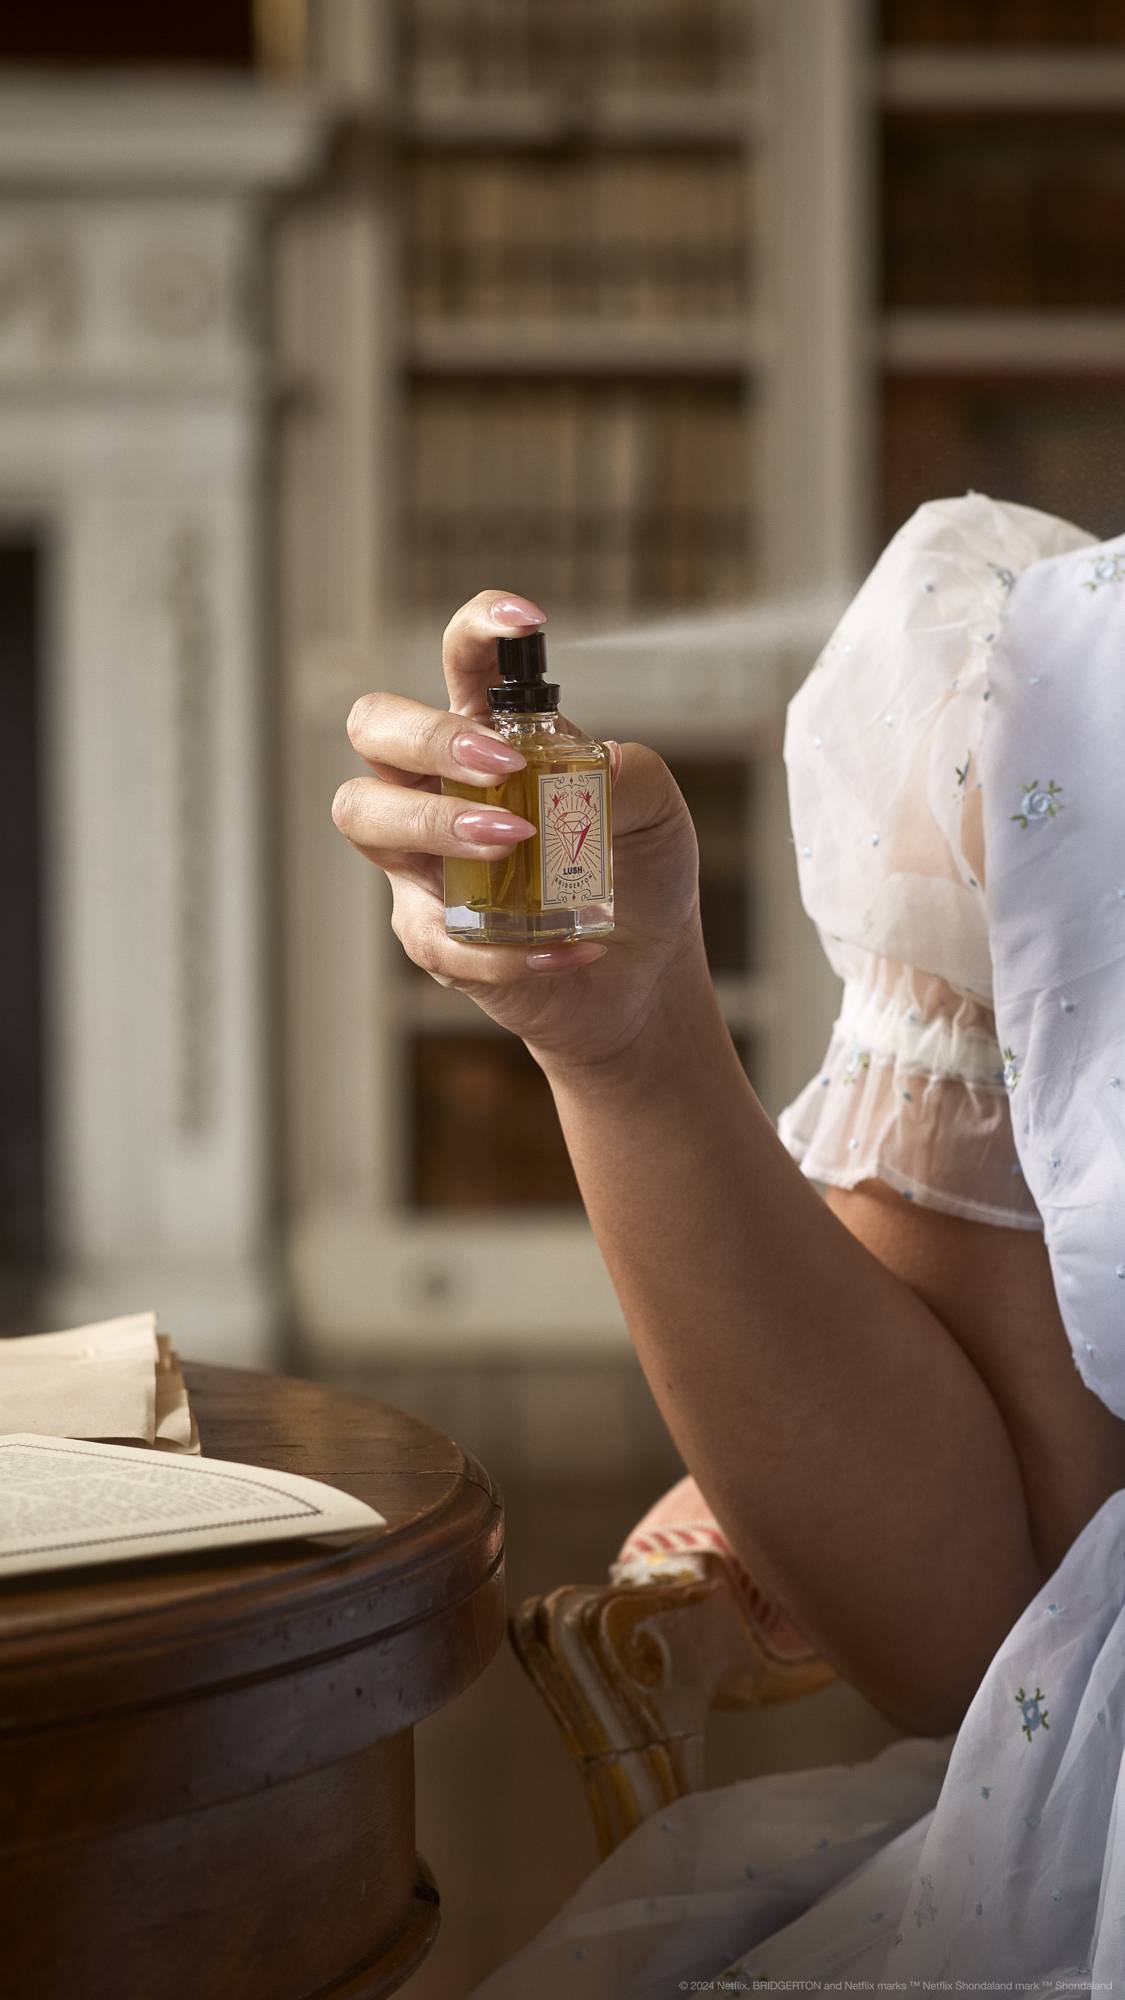 A close-up image of the model's hand holding the LUSH | Bridgerton perfume bottle as they are-mid spritz.